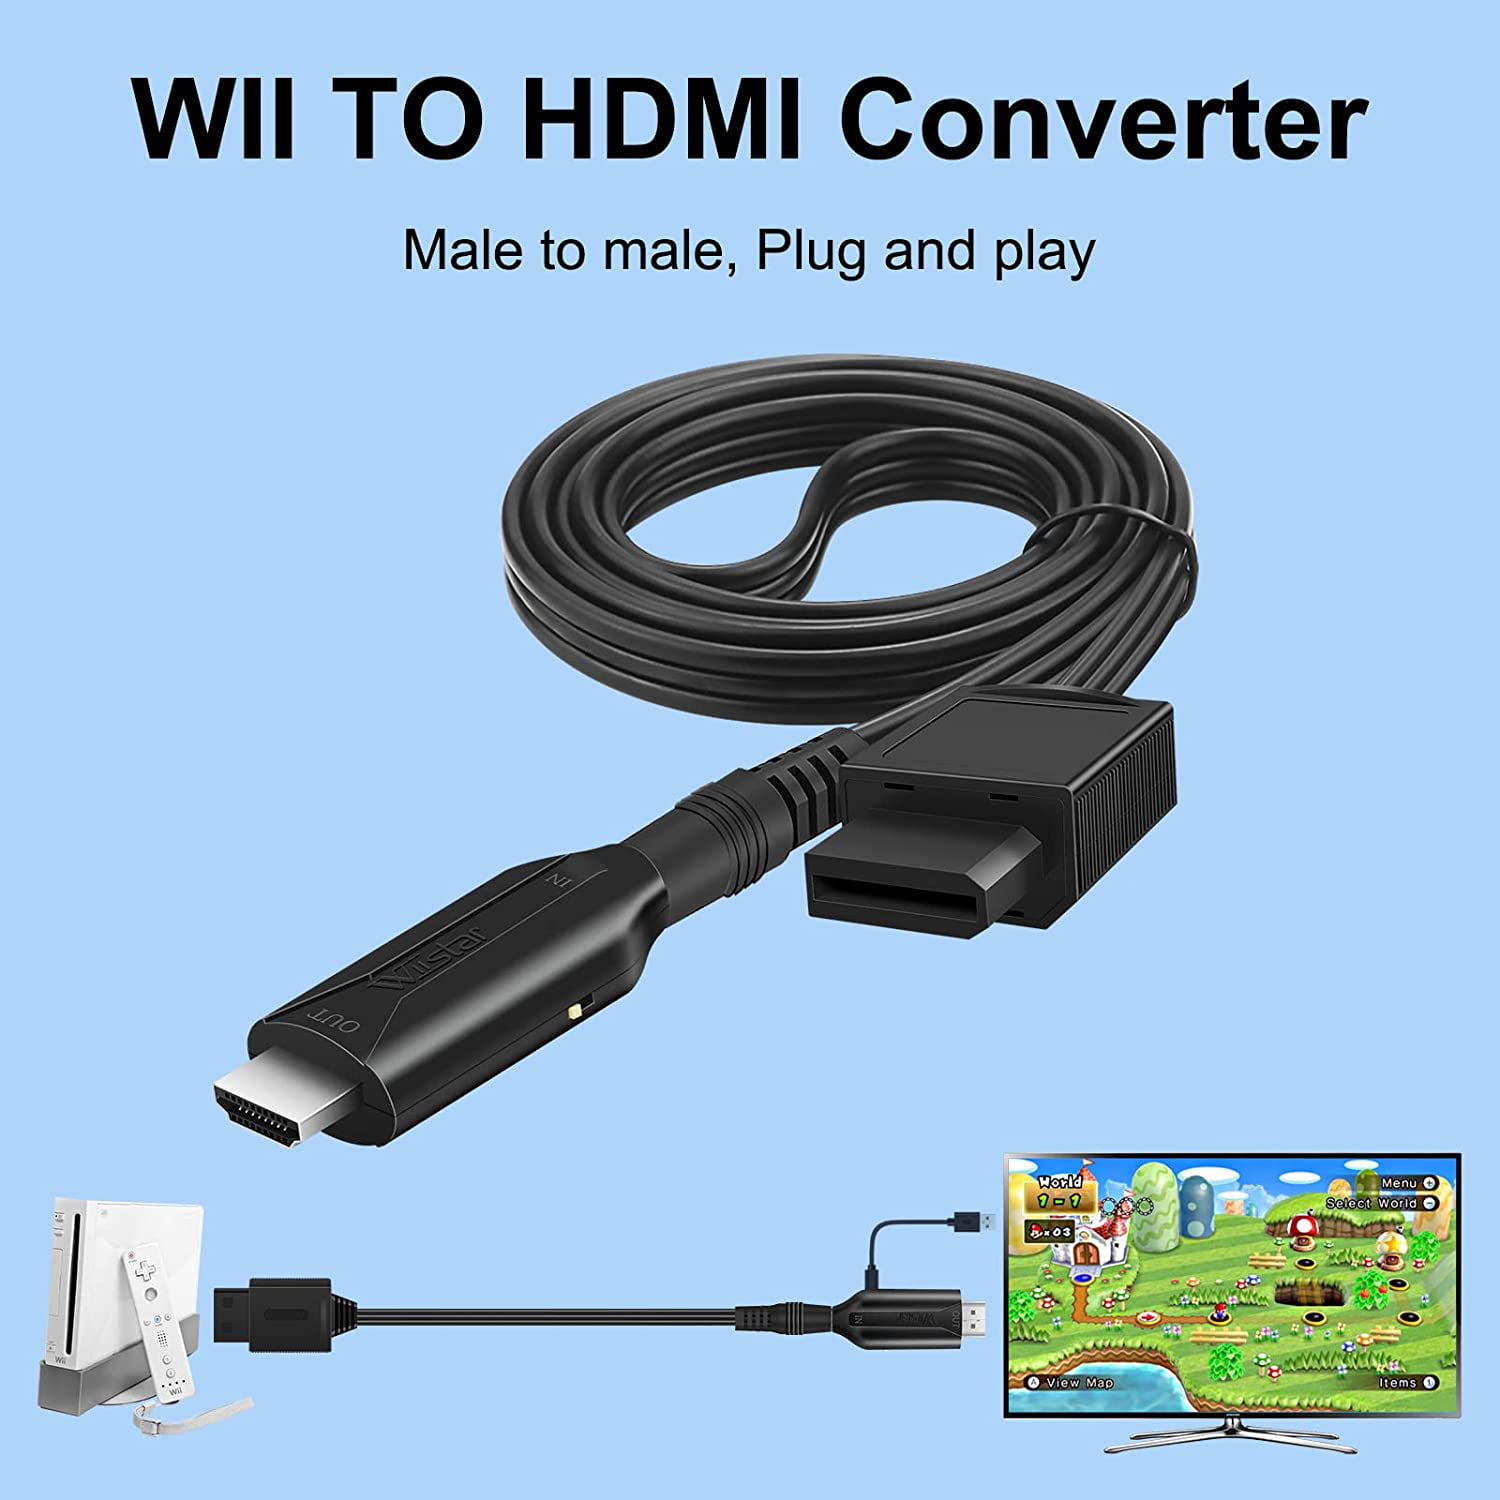 FULL HD 1080P Wii HDMI Cable Converter Adapter to HDTV